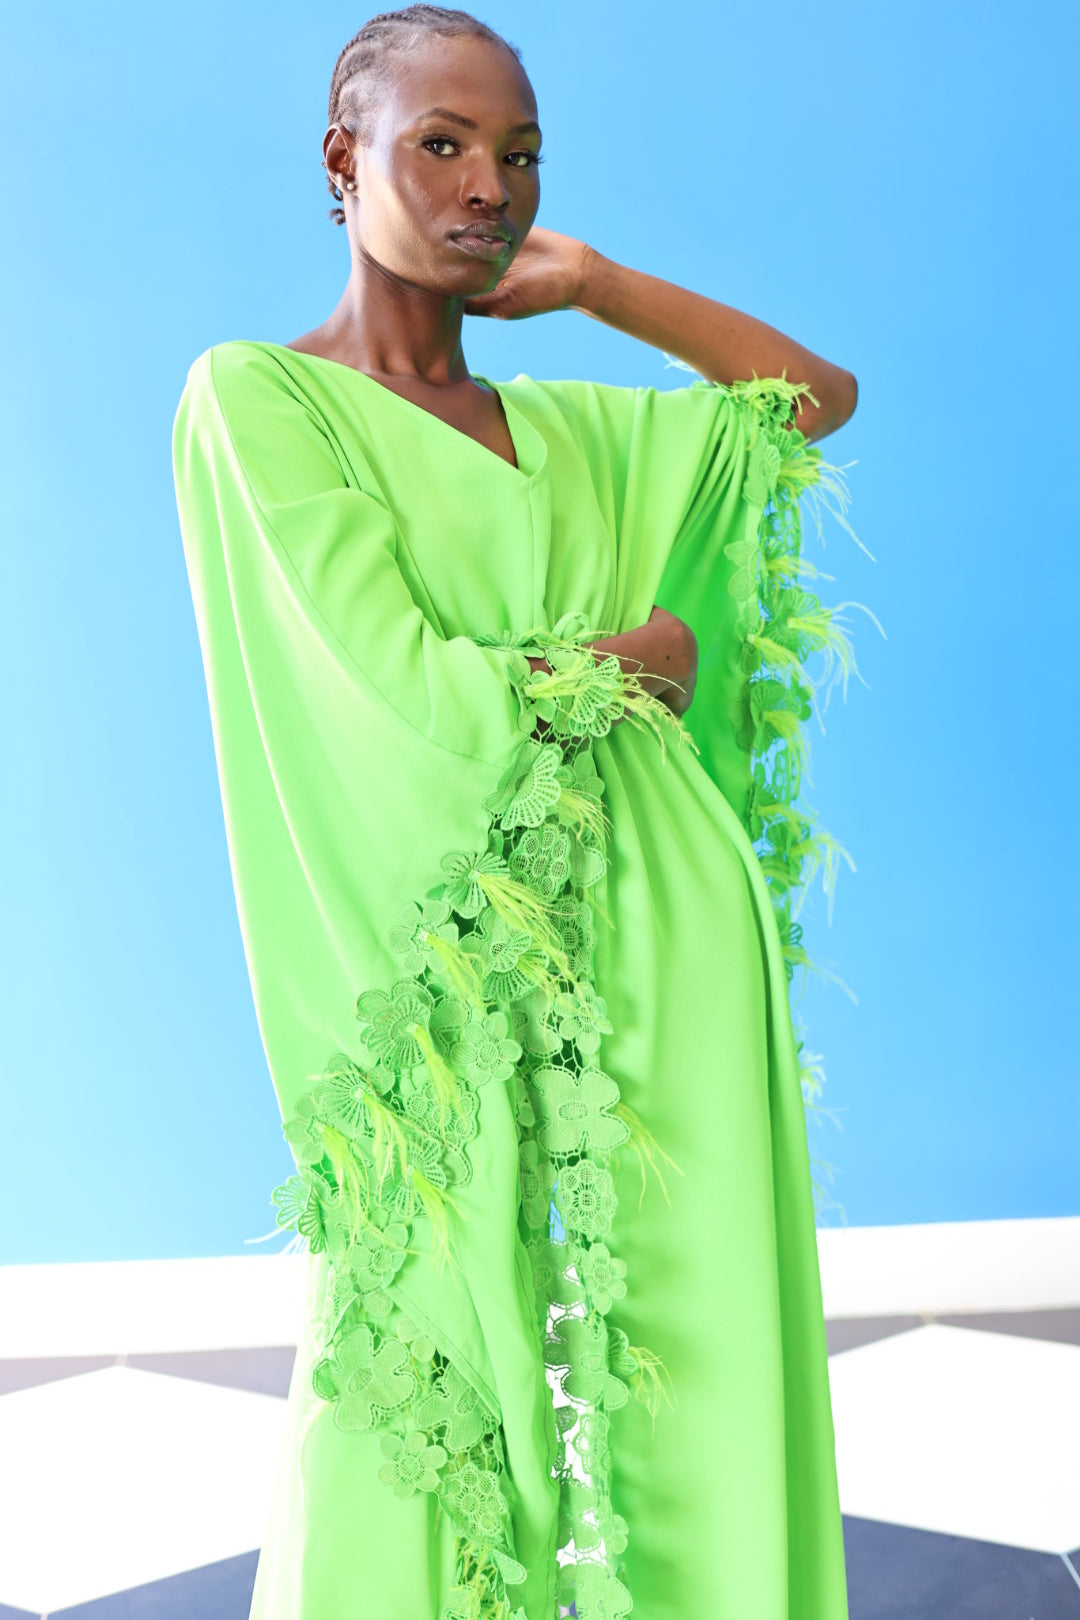 The Poppy Floral Jumpsuit in Green has gorgeous floral lace at the edge of the fabric, along with faux feathers that create a fun texture. The wide sleeves and wide legged pants allow you to feel free and fabulous at the same time.